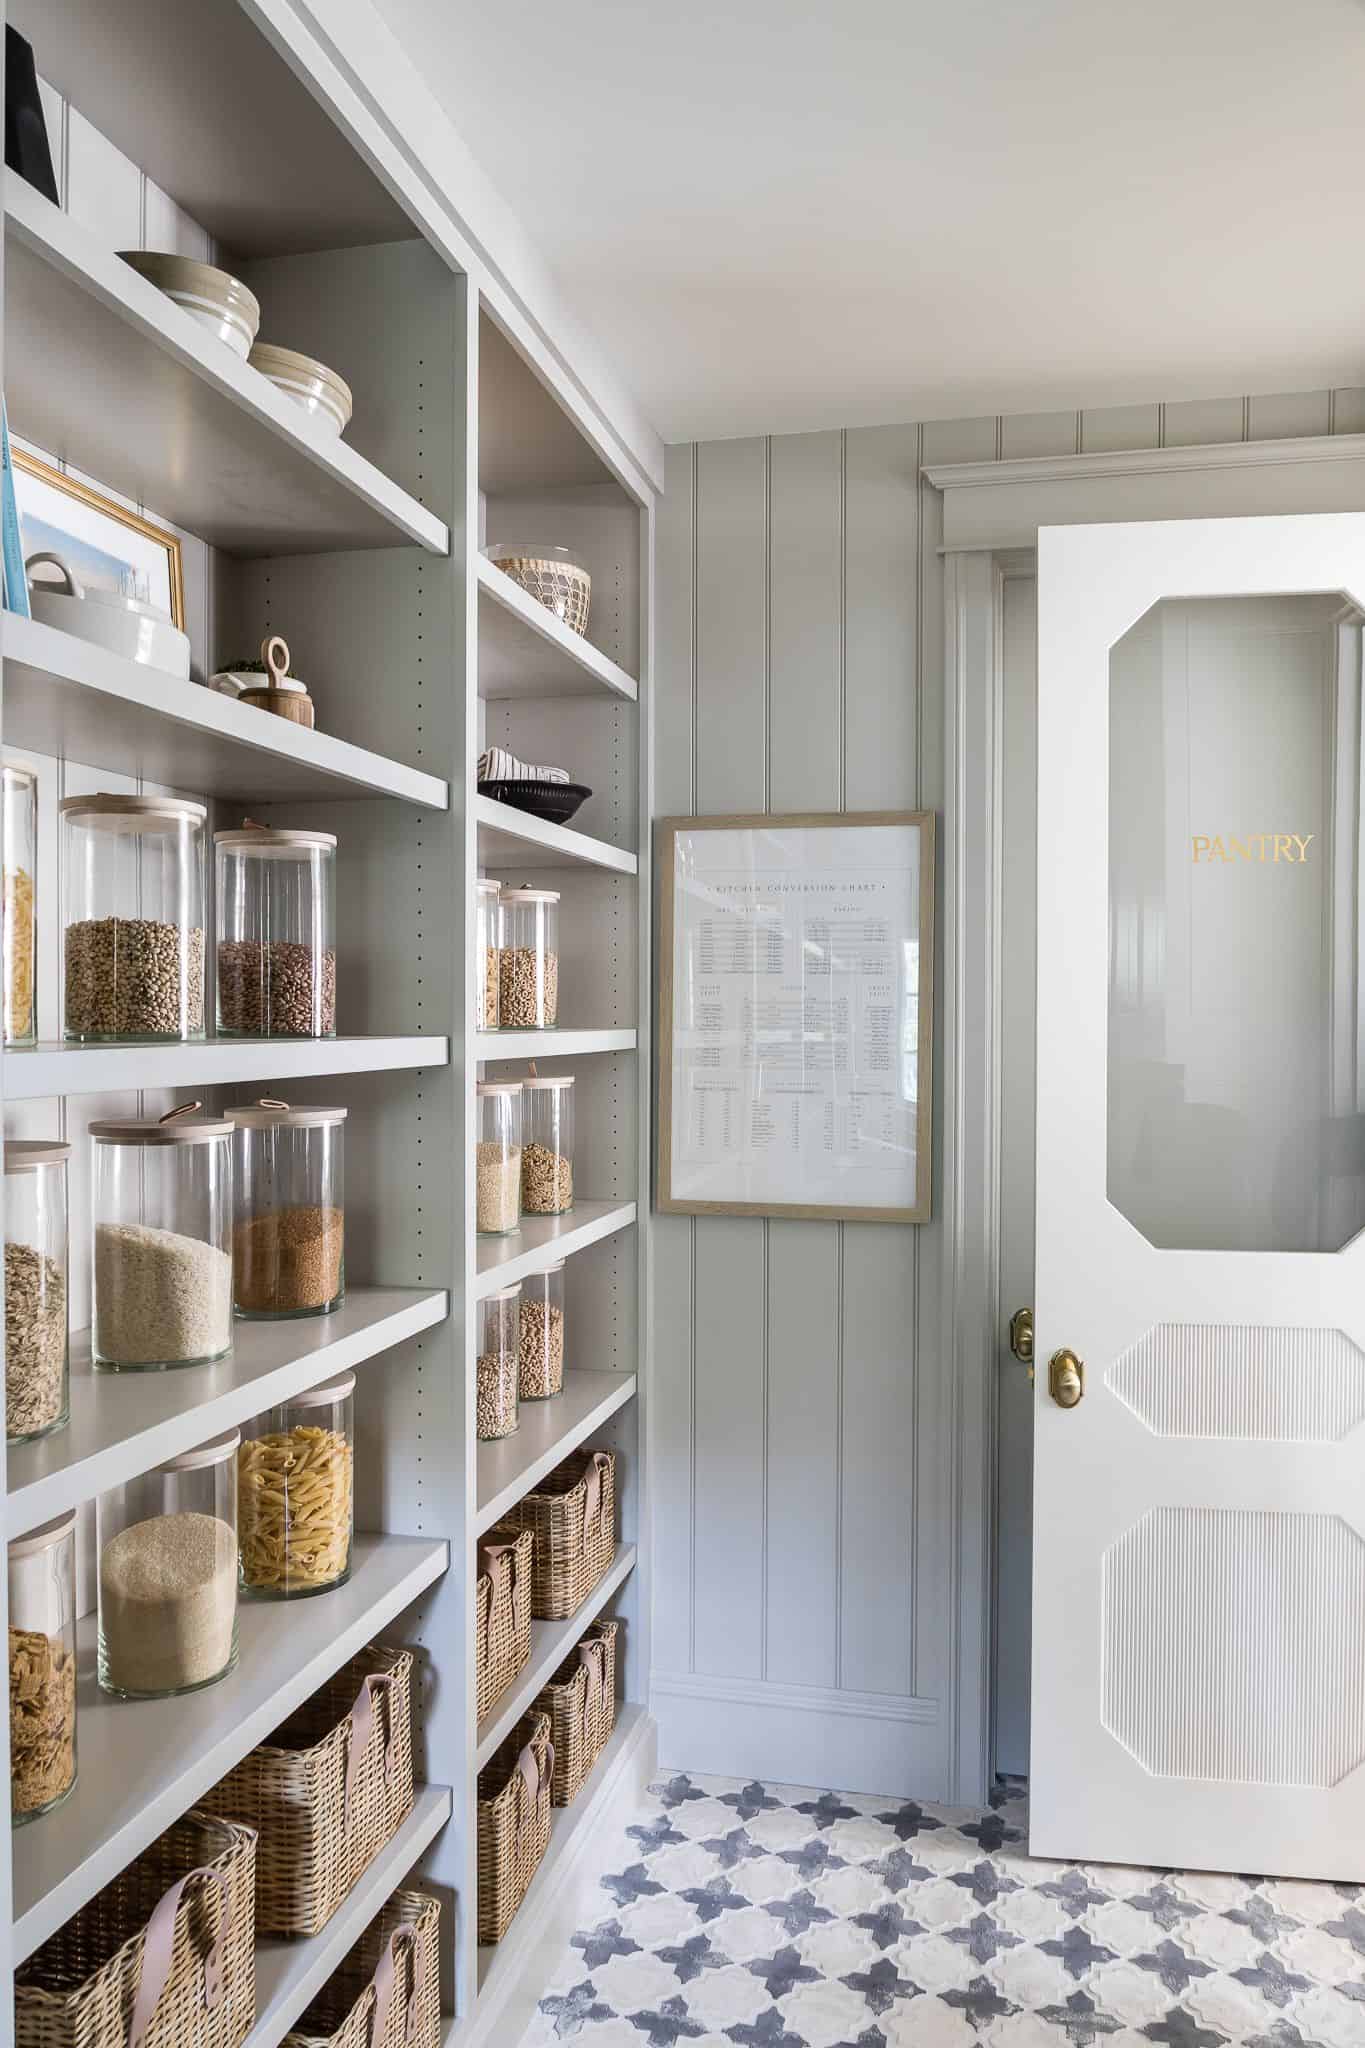 Home Reveal: Nellie Gail Pantry - Mindy Gayer Design Co.